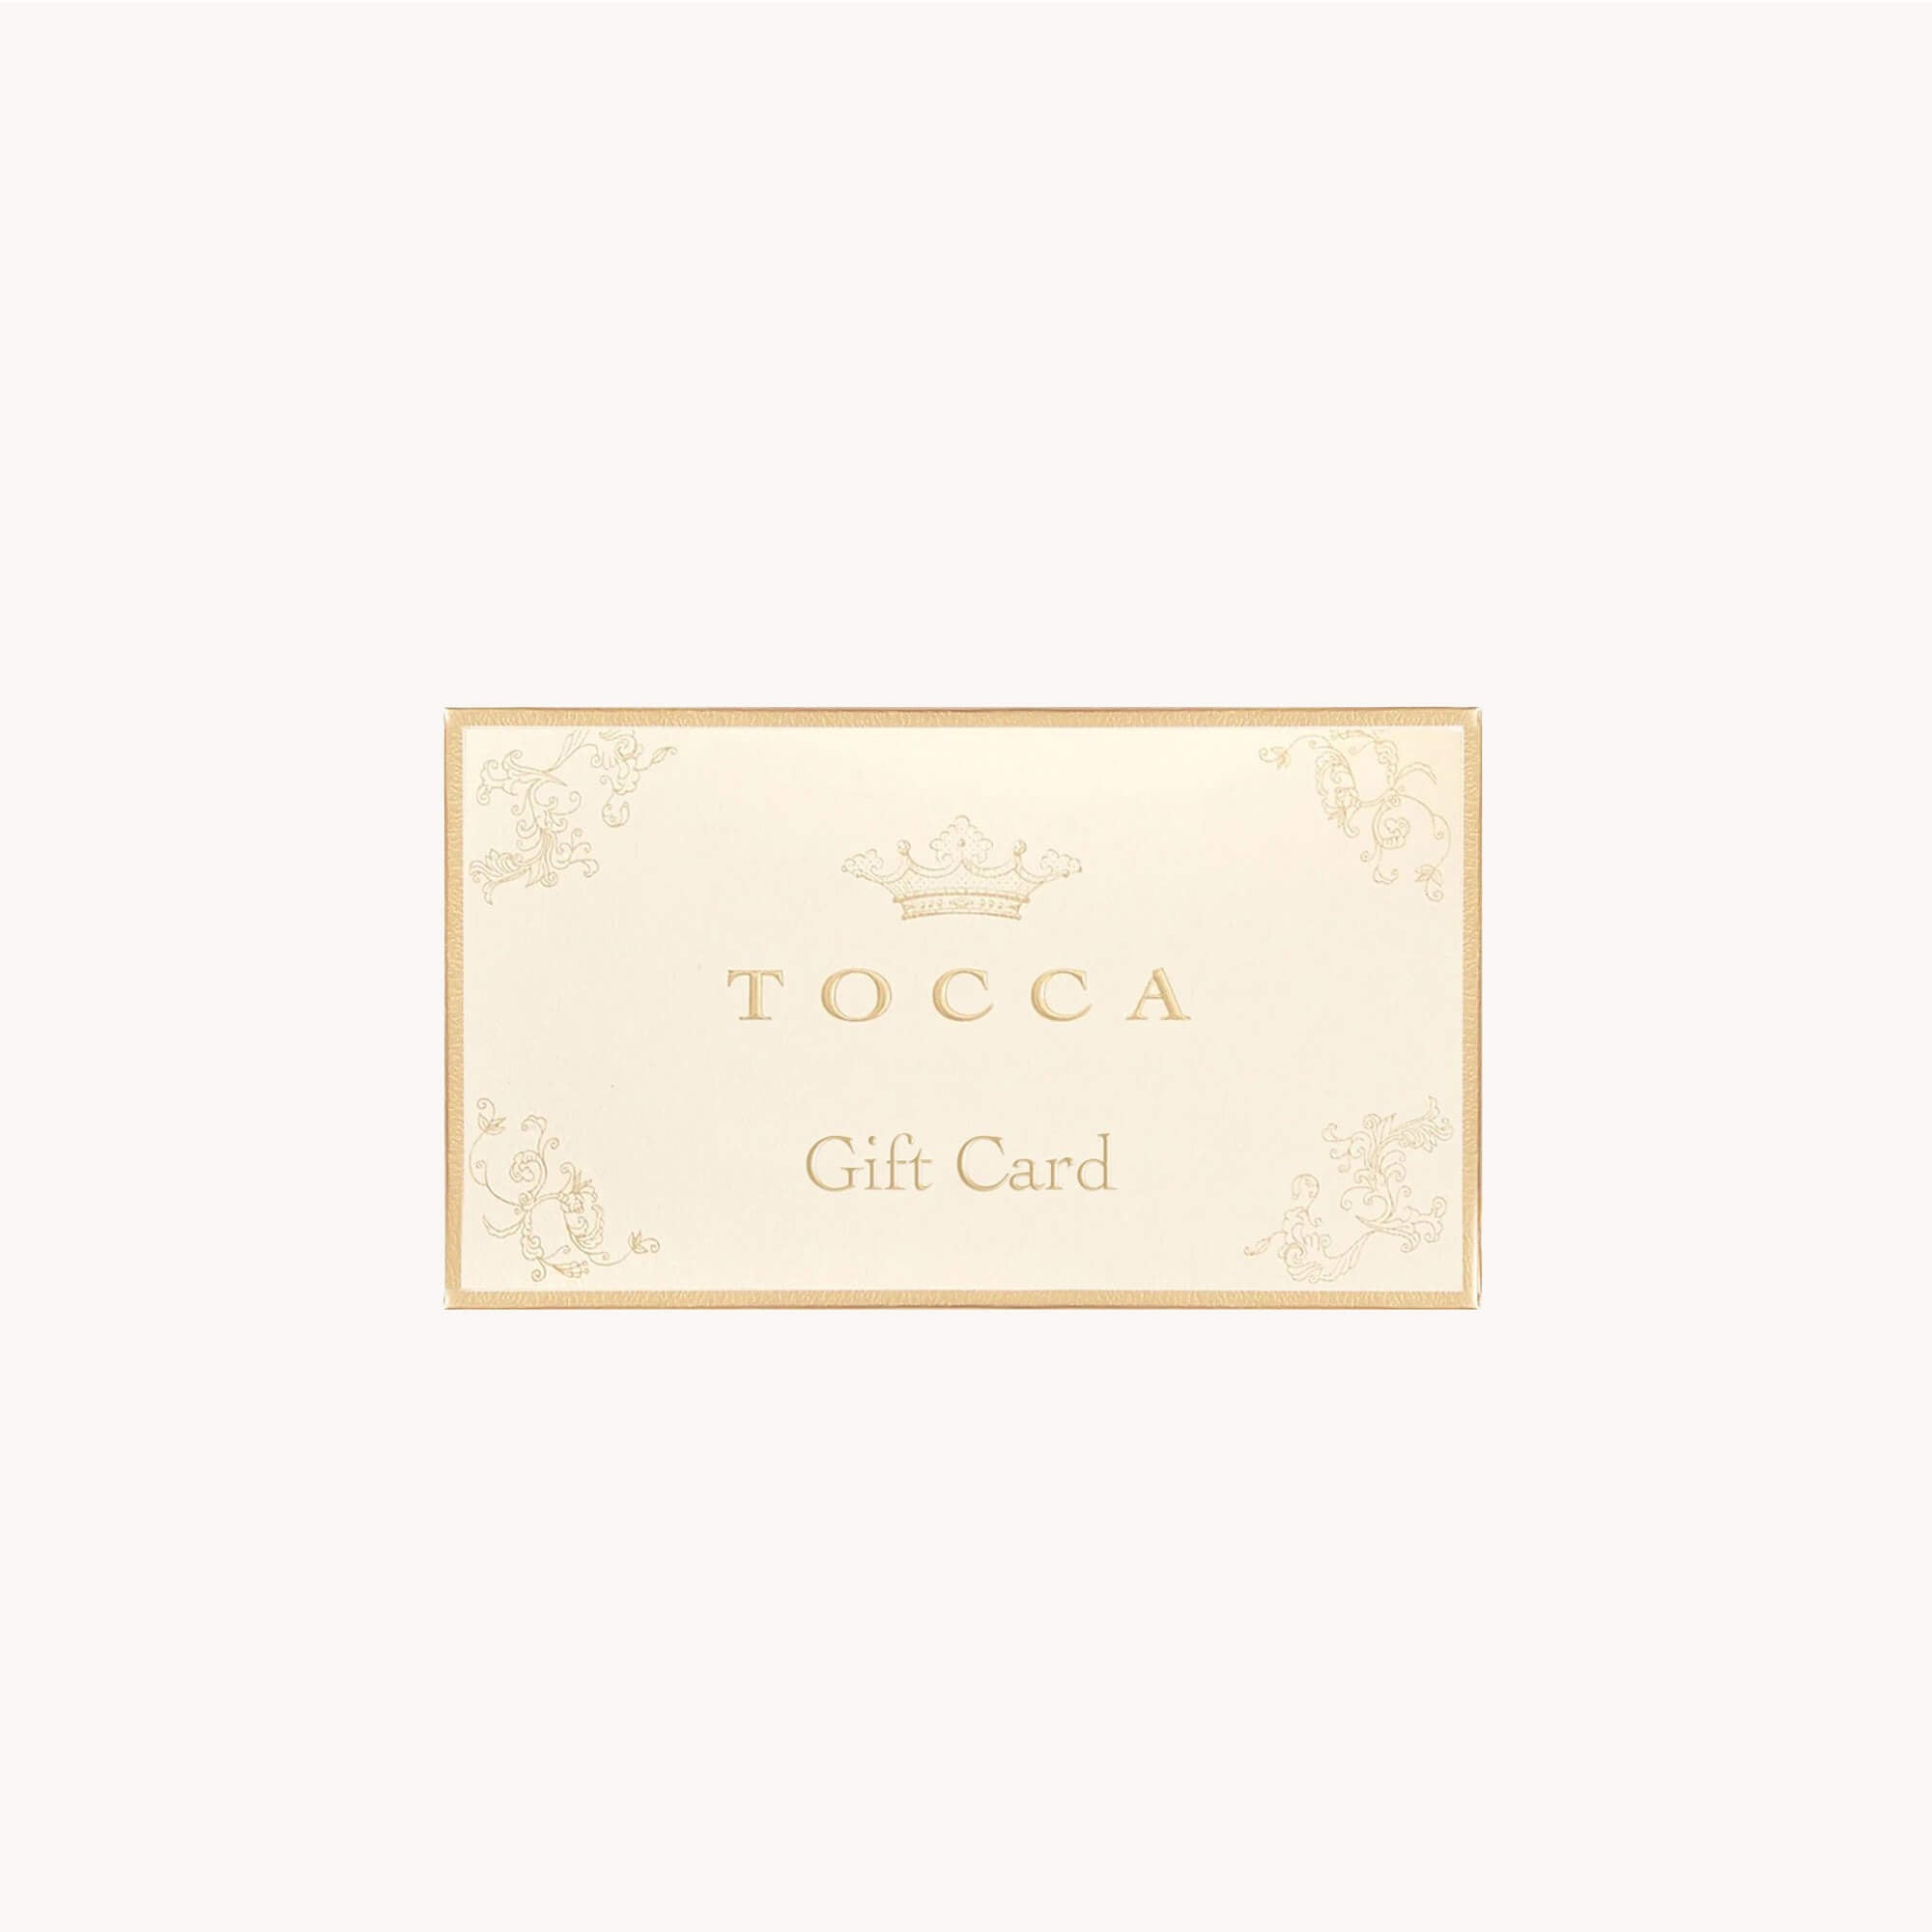 Tocca Gift Card TOCCA.com Gift Card